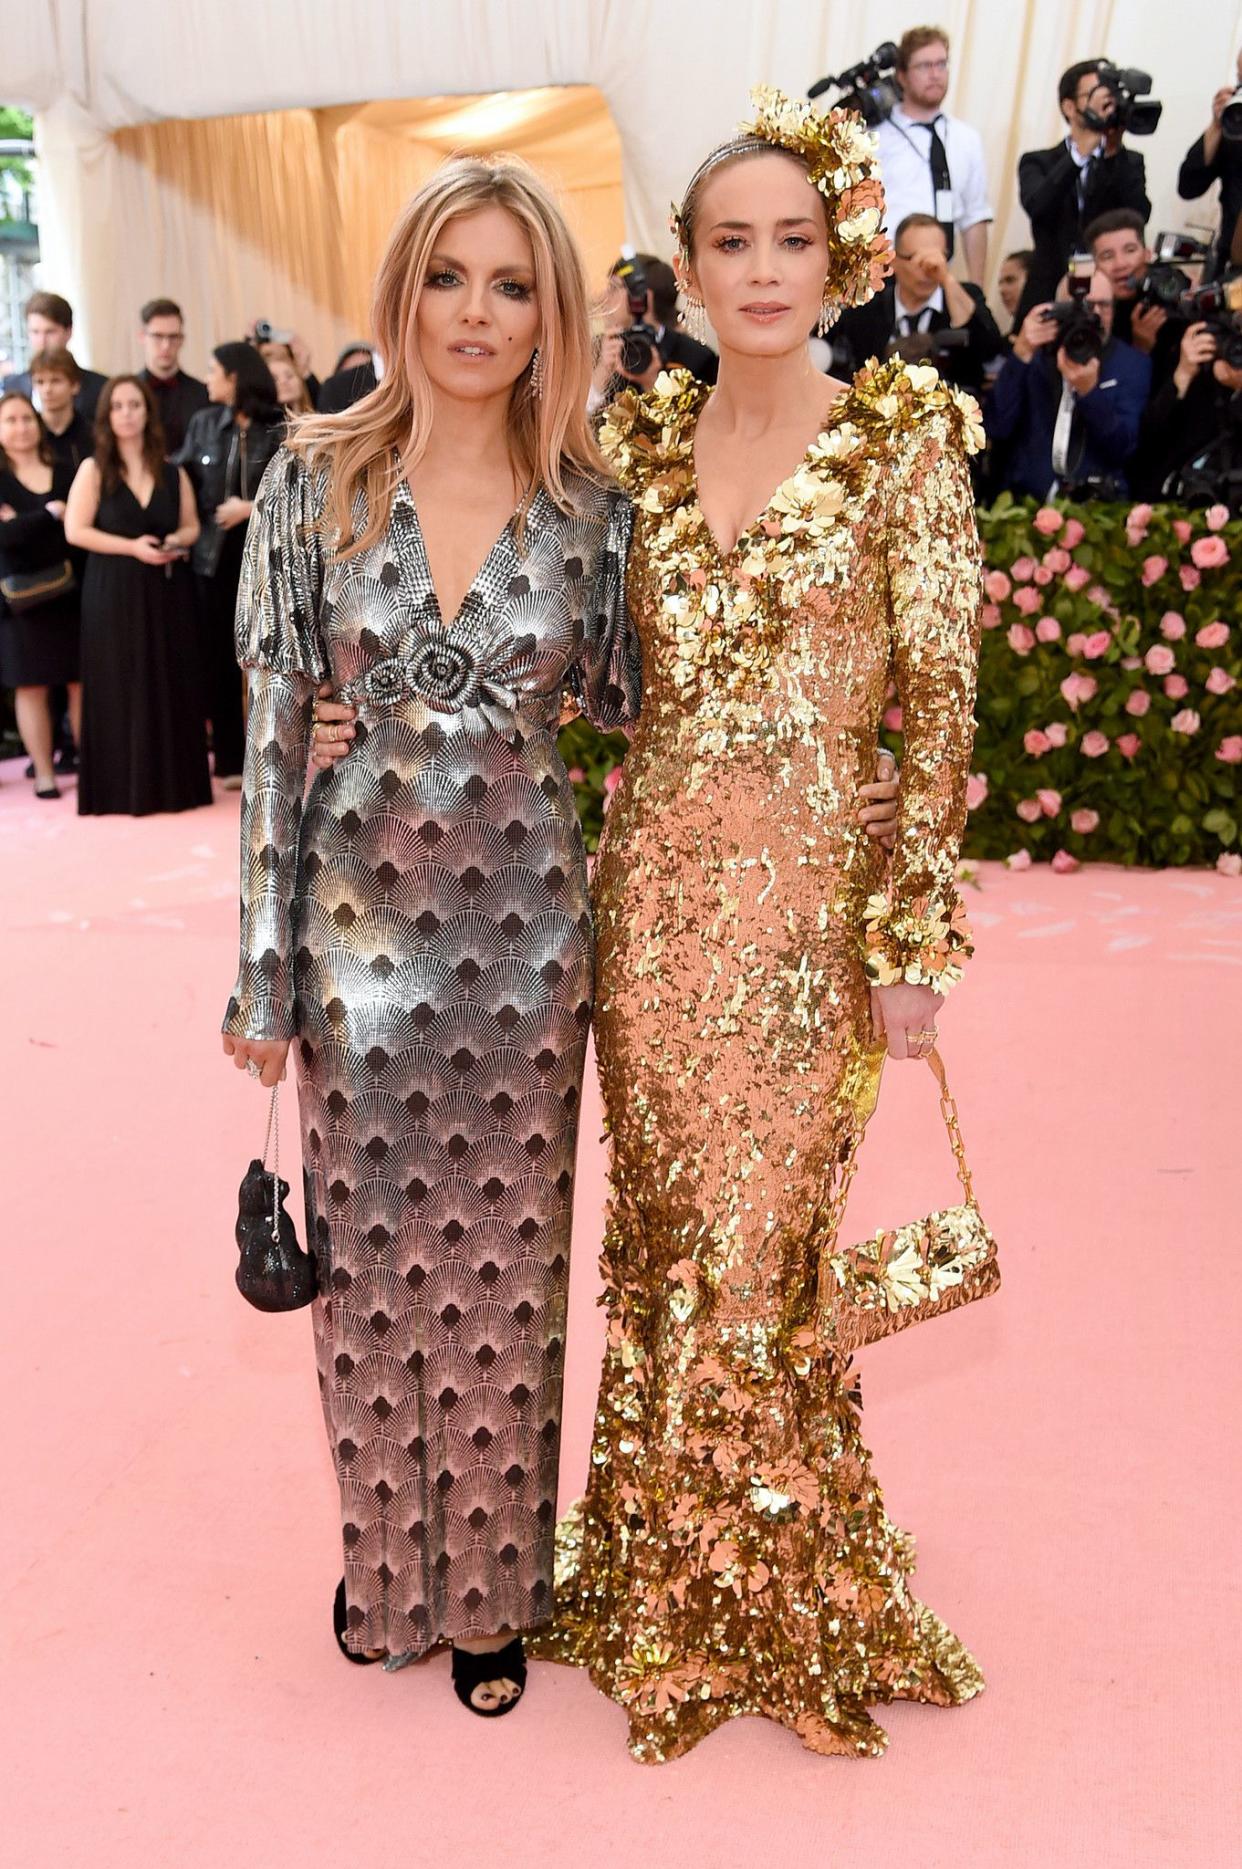 Sienna Miller and Emily Blunt attend The 2019 Met Gala Celebrating Camp: Notes on Fashion at Metropolitan Museum of Art on May 06, 2019 in New York City.